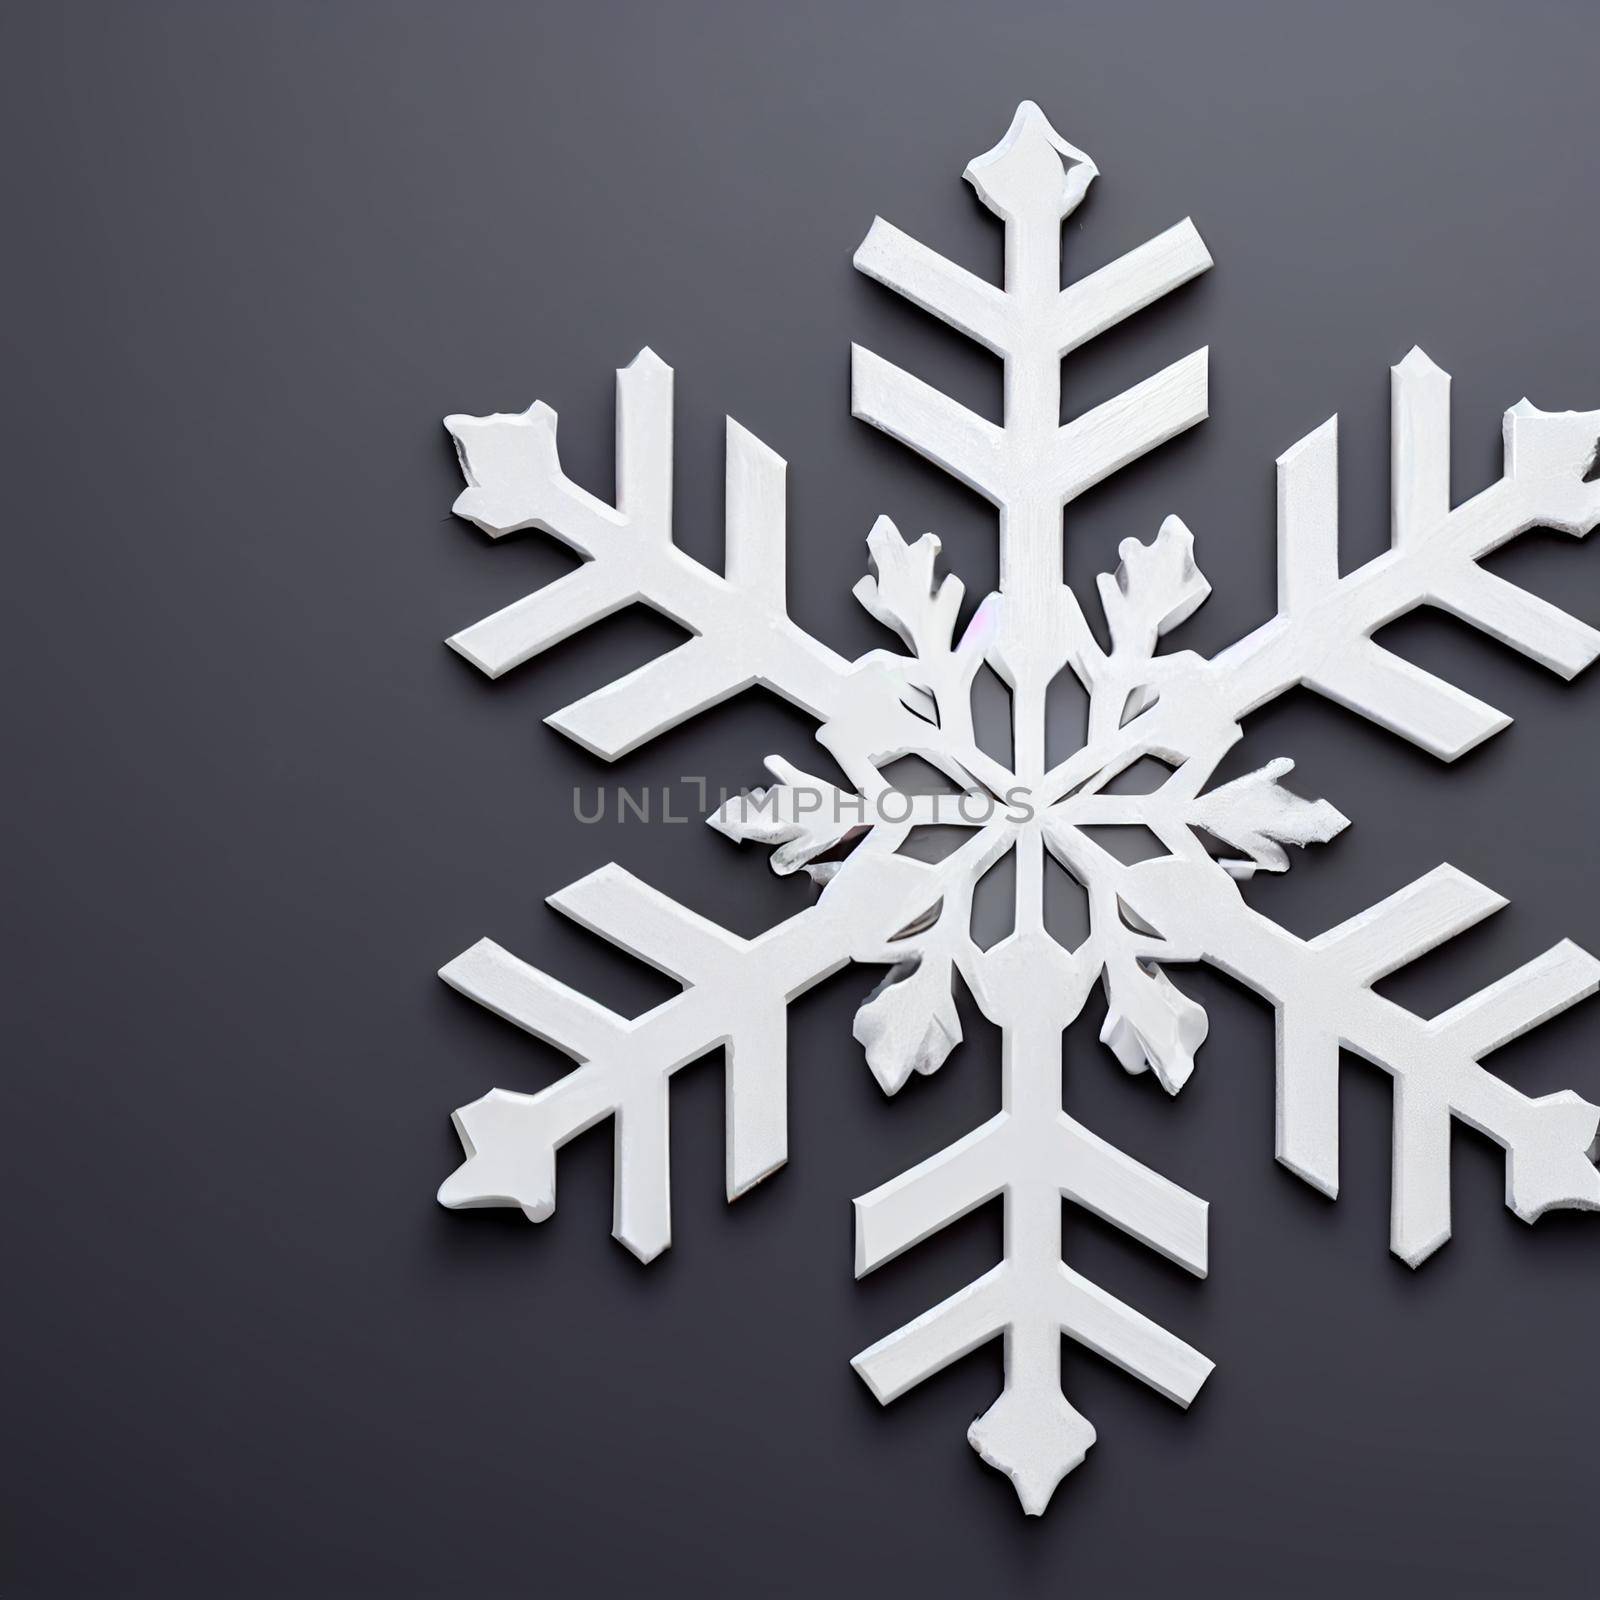 Design image of a snowflake. High quality illustration